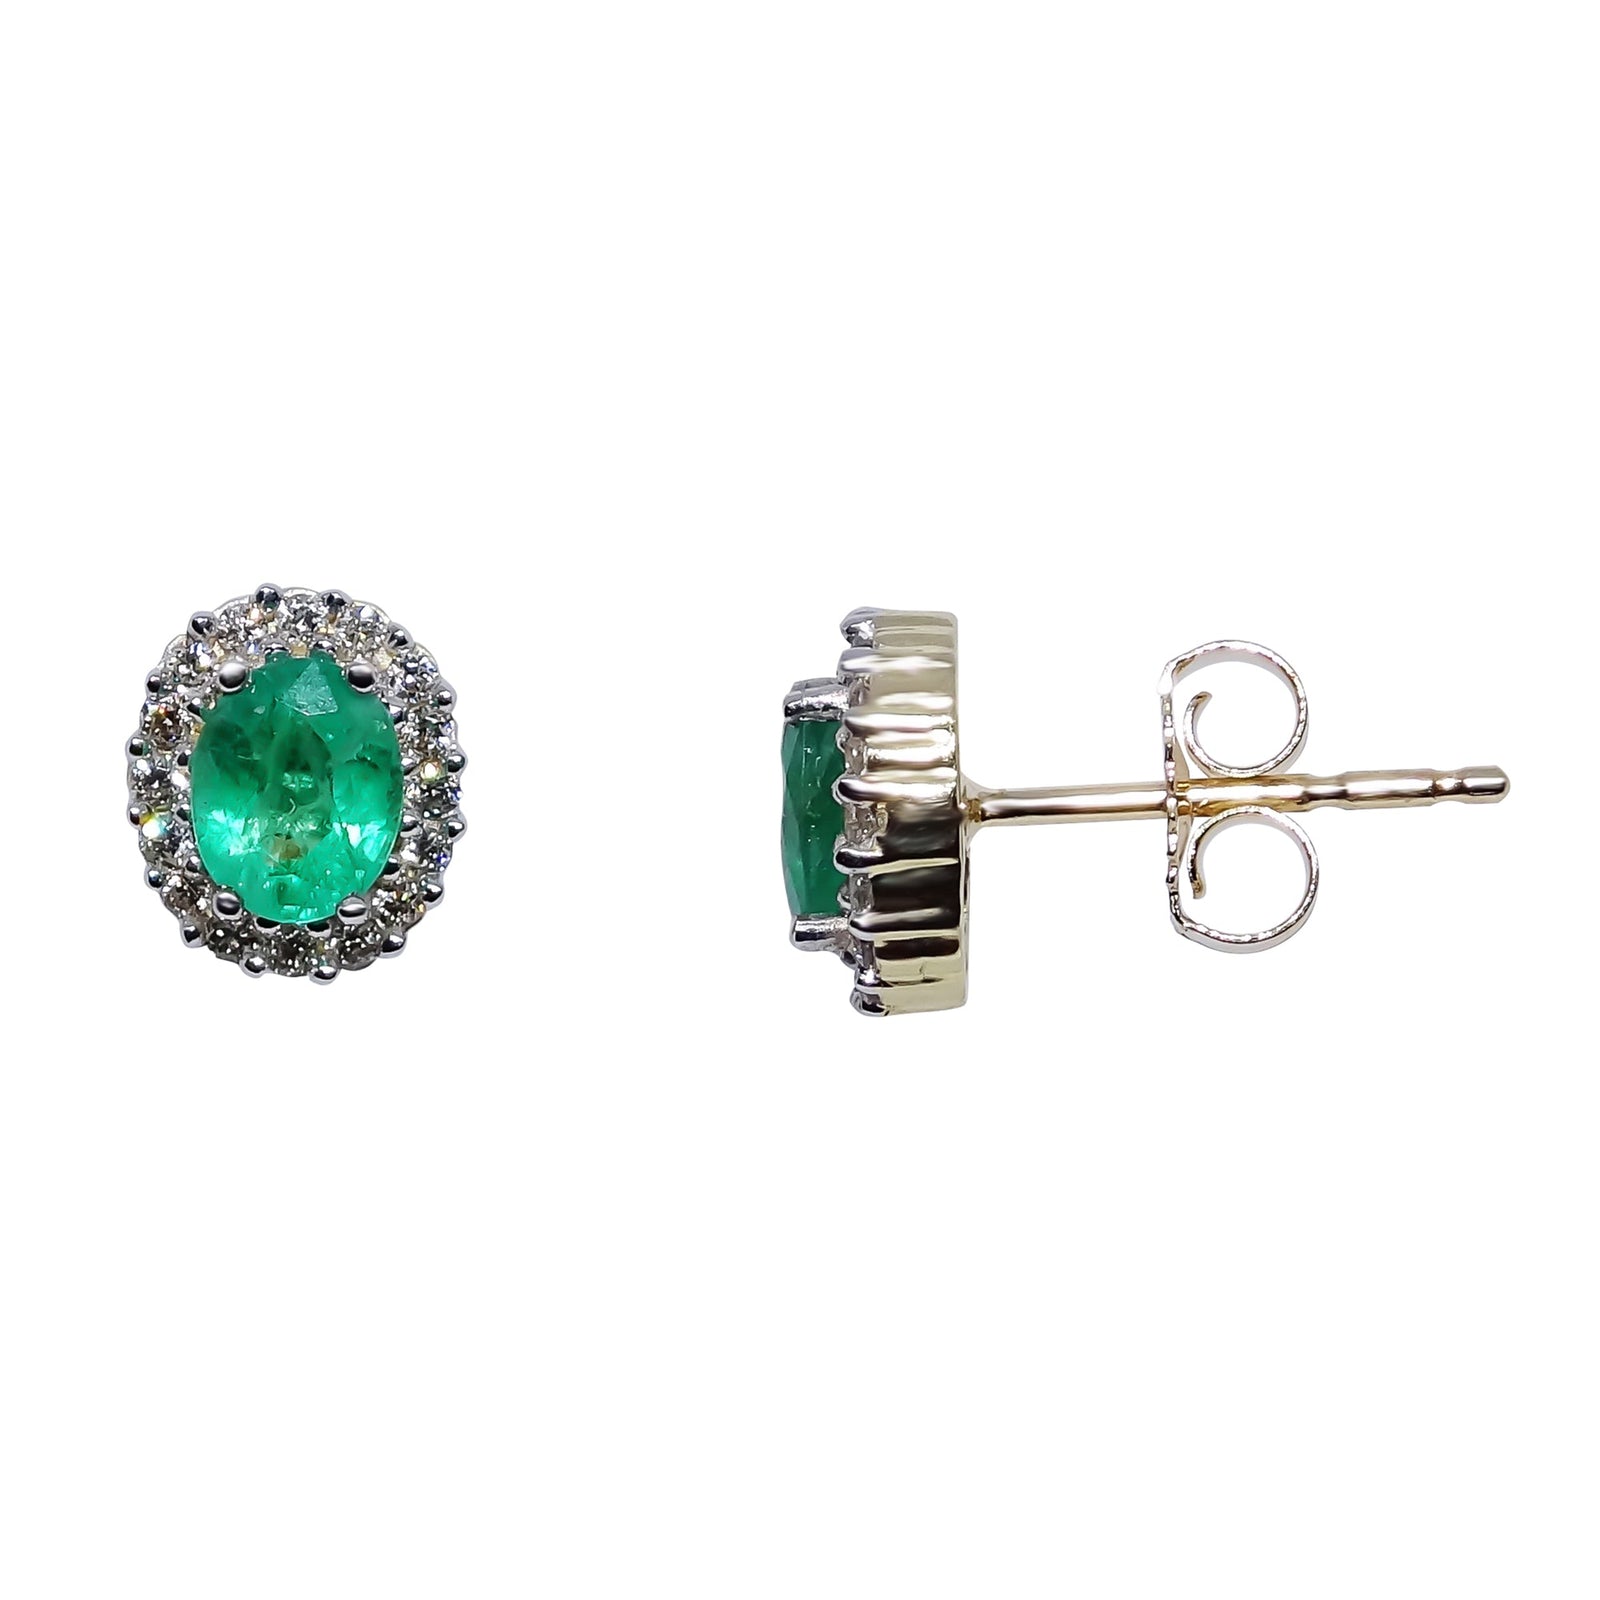 9ct gold 5x4mm oval emerald & diamoncdcluster stud earrings 0.17ct